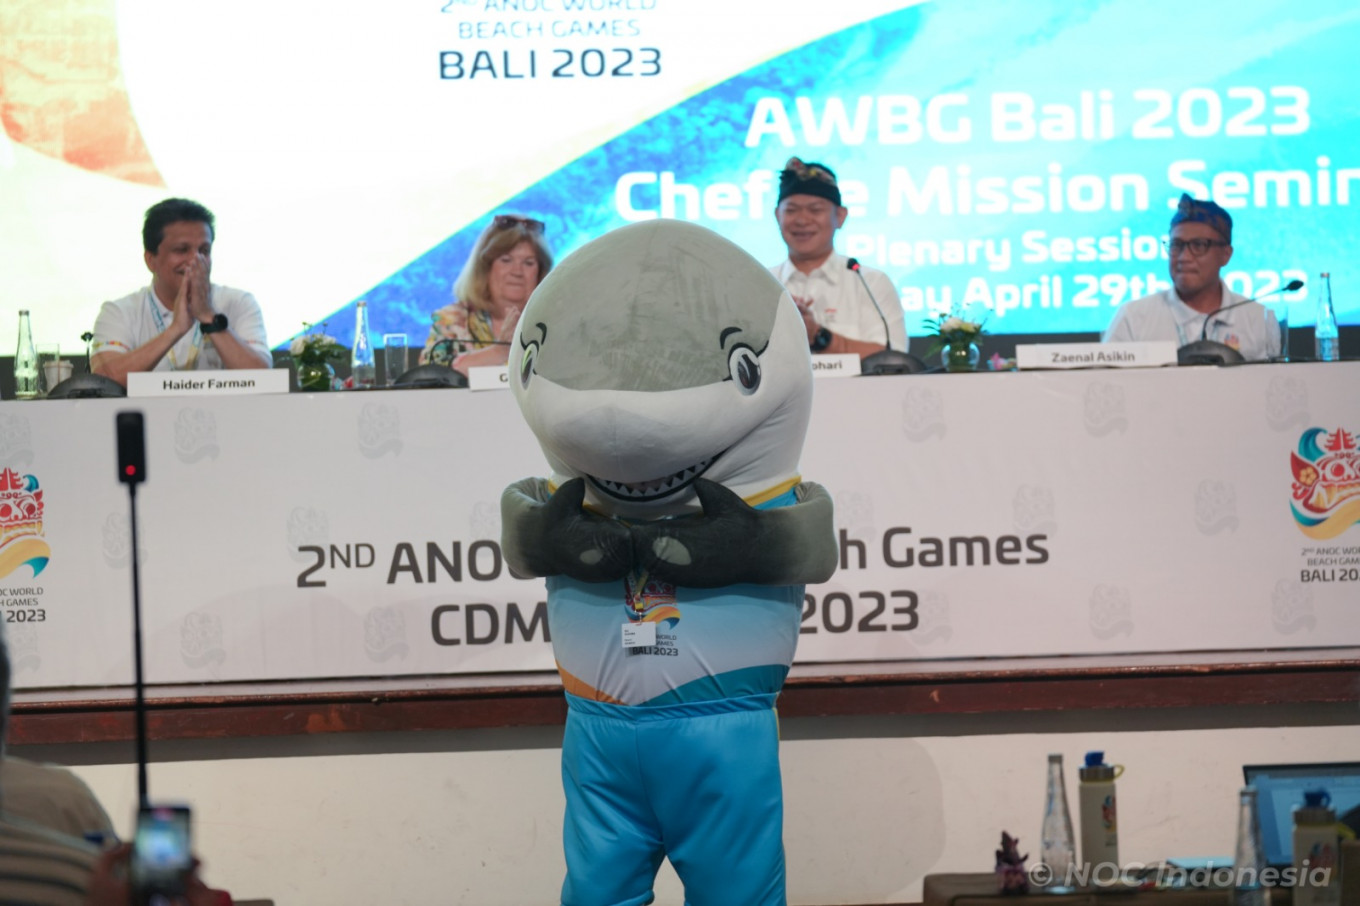 ANOC World Beach Games launch mascots for 2023 Bali event Sports